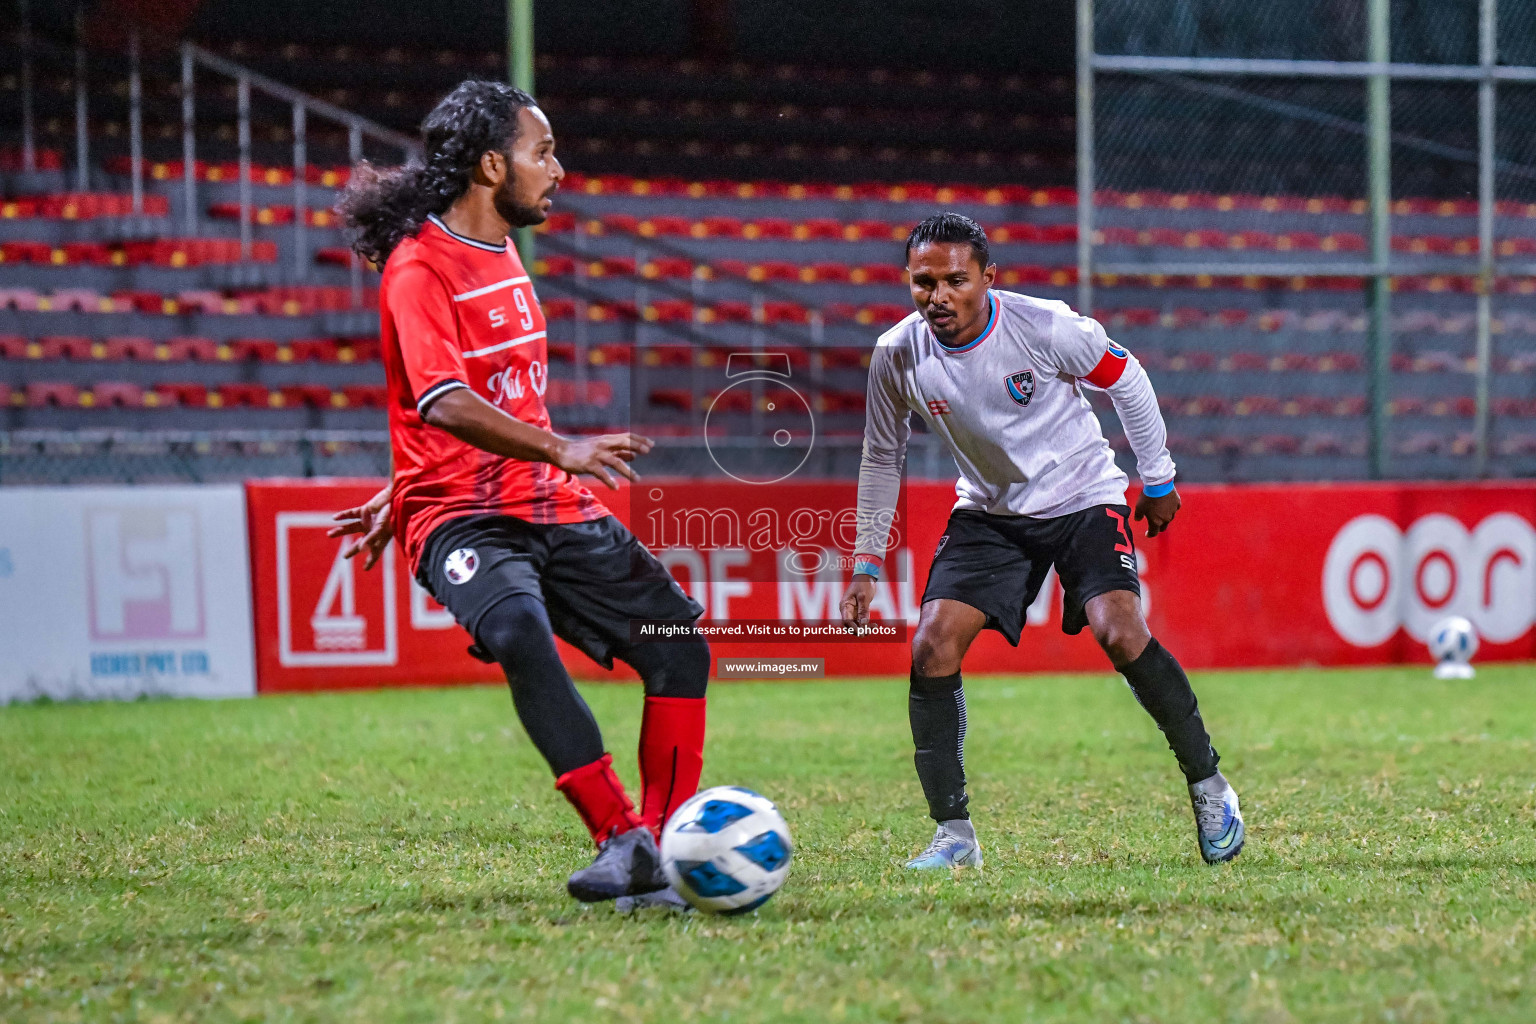 CLUB PK (PArK KanMaThI) vs Biss Buru Sports  in the 2nd Division 2022 on 29th July 2022, held in National Football Stadium, Male', Maldives Photos: Nausham Waheed / images.mv